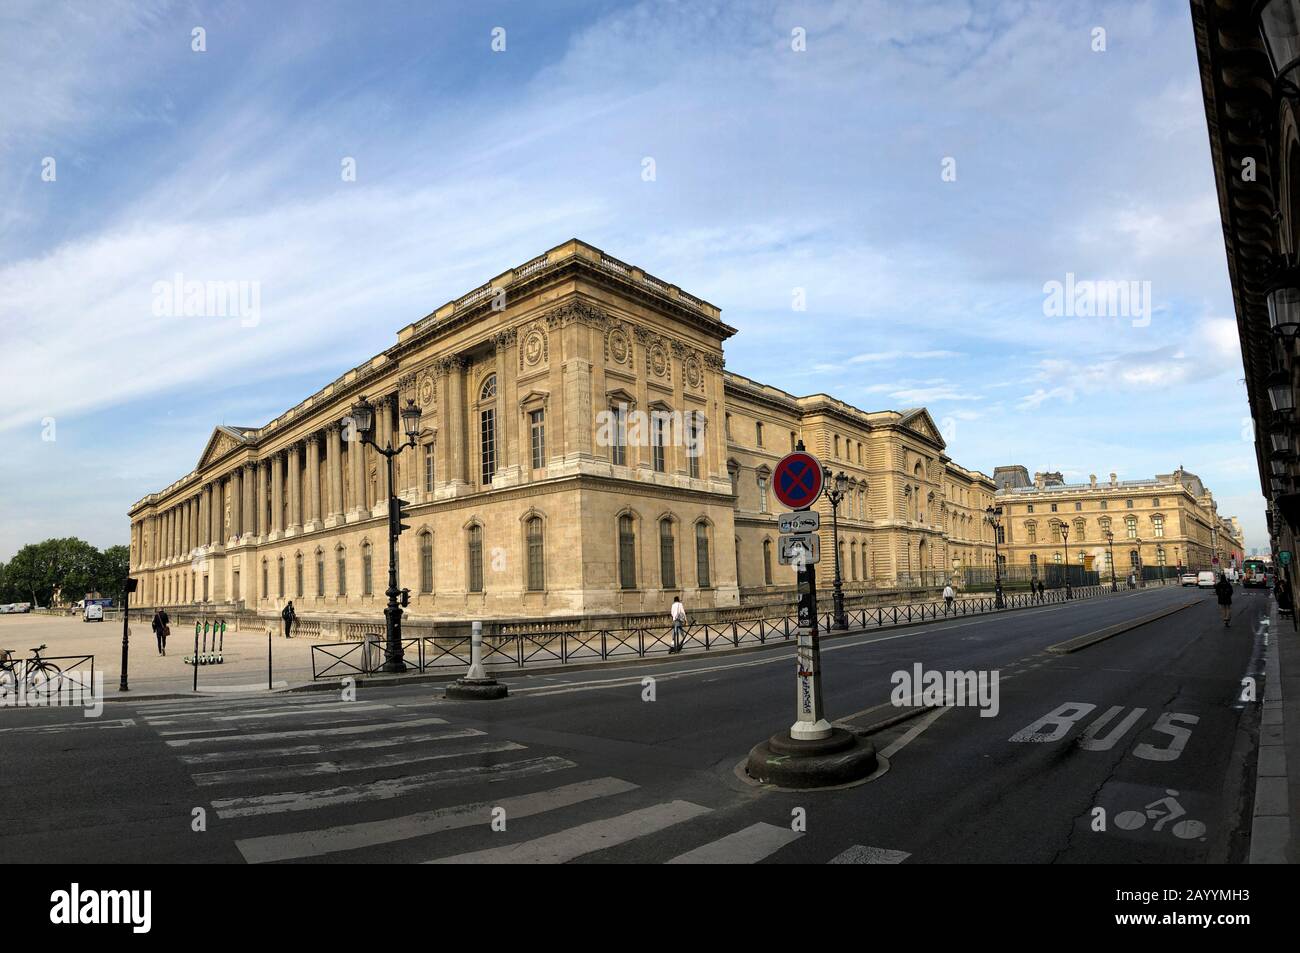 Paris, France - 05.24.2019: Outside of the famous Louvre Museum. Louvre Museum is one of the largest and most visited Museum in the world Stock Photo